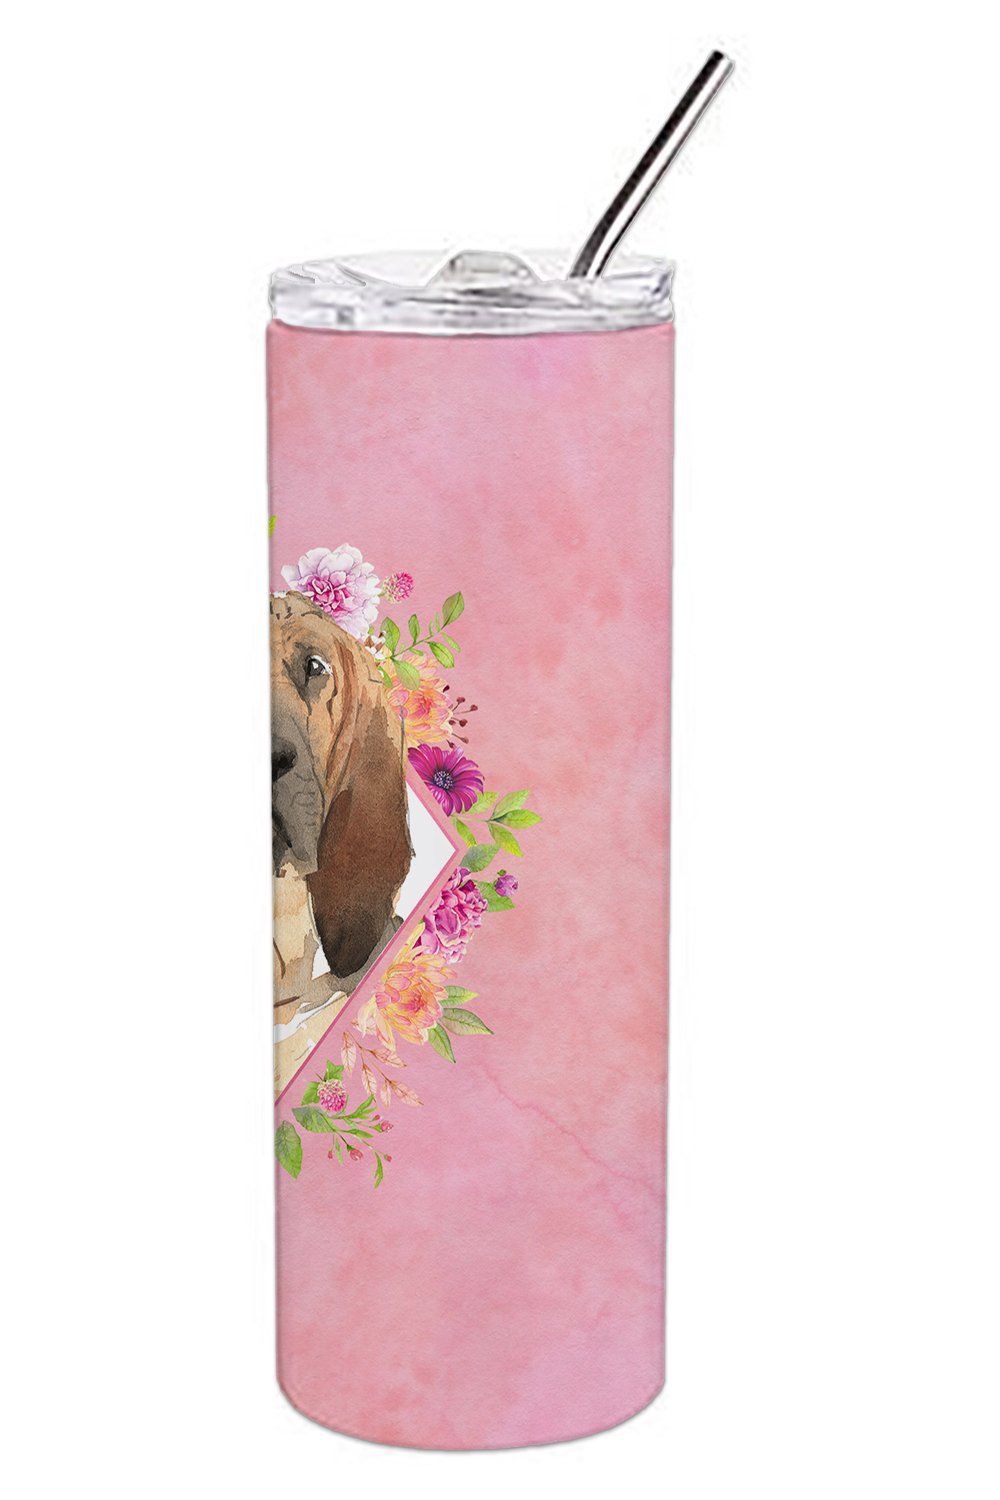 Bloodhound Pink Flowers Double Walled Stainless Steel 20 oz Skinny Tumbler CK4259TBL20 by Caroline's Treasures